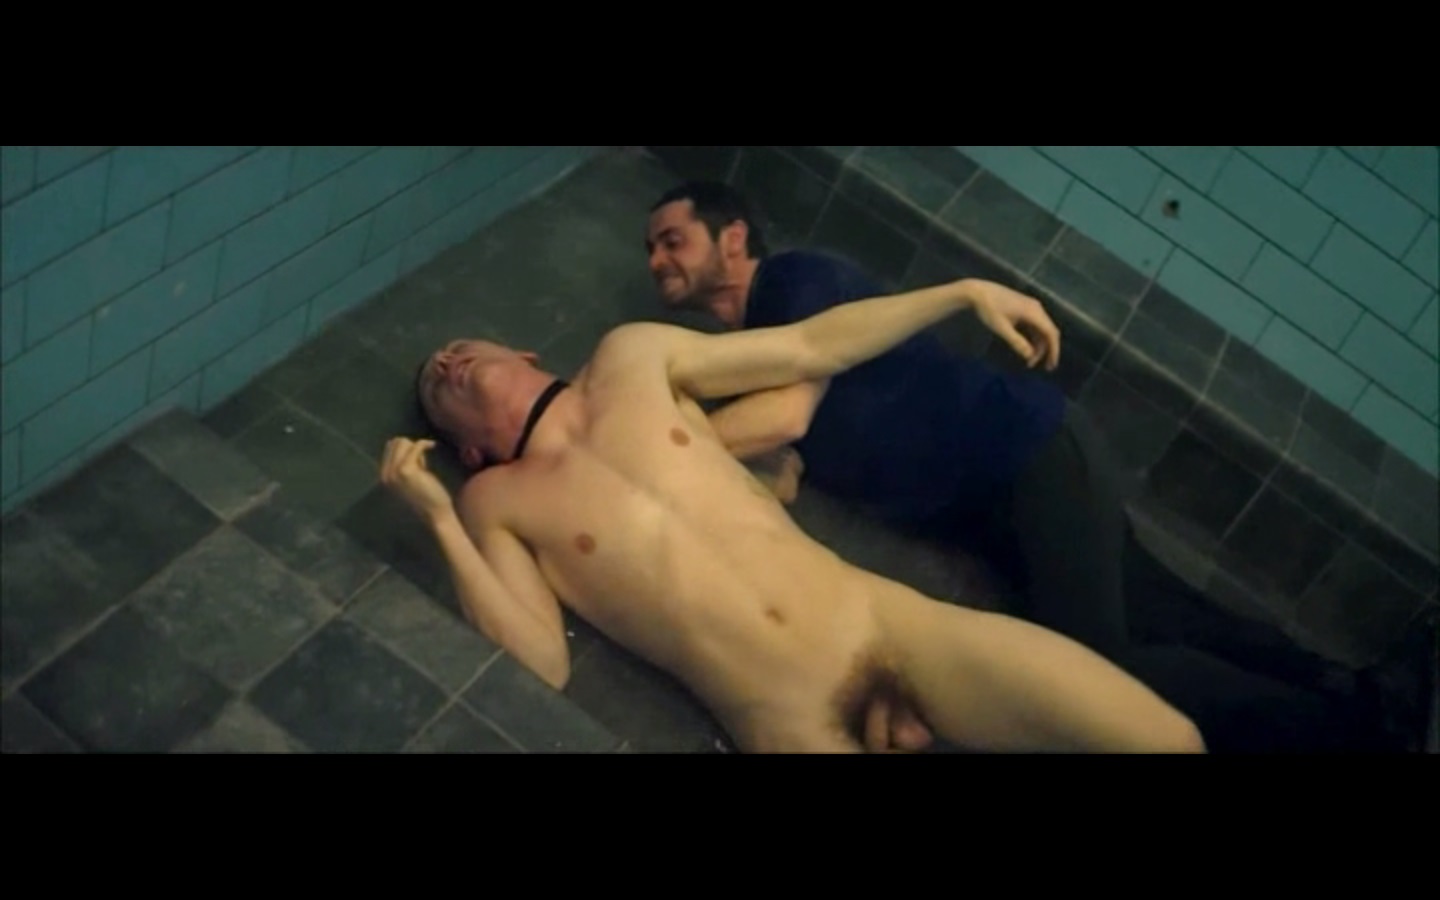 Starred Up - Jack O'Connell.